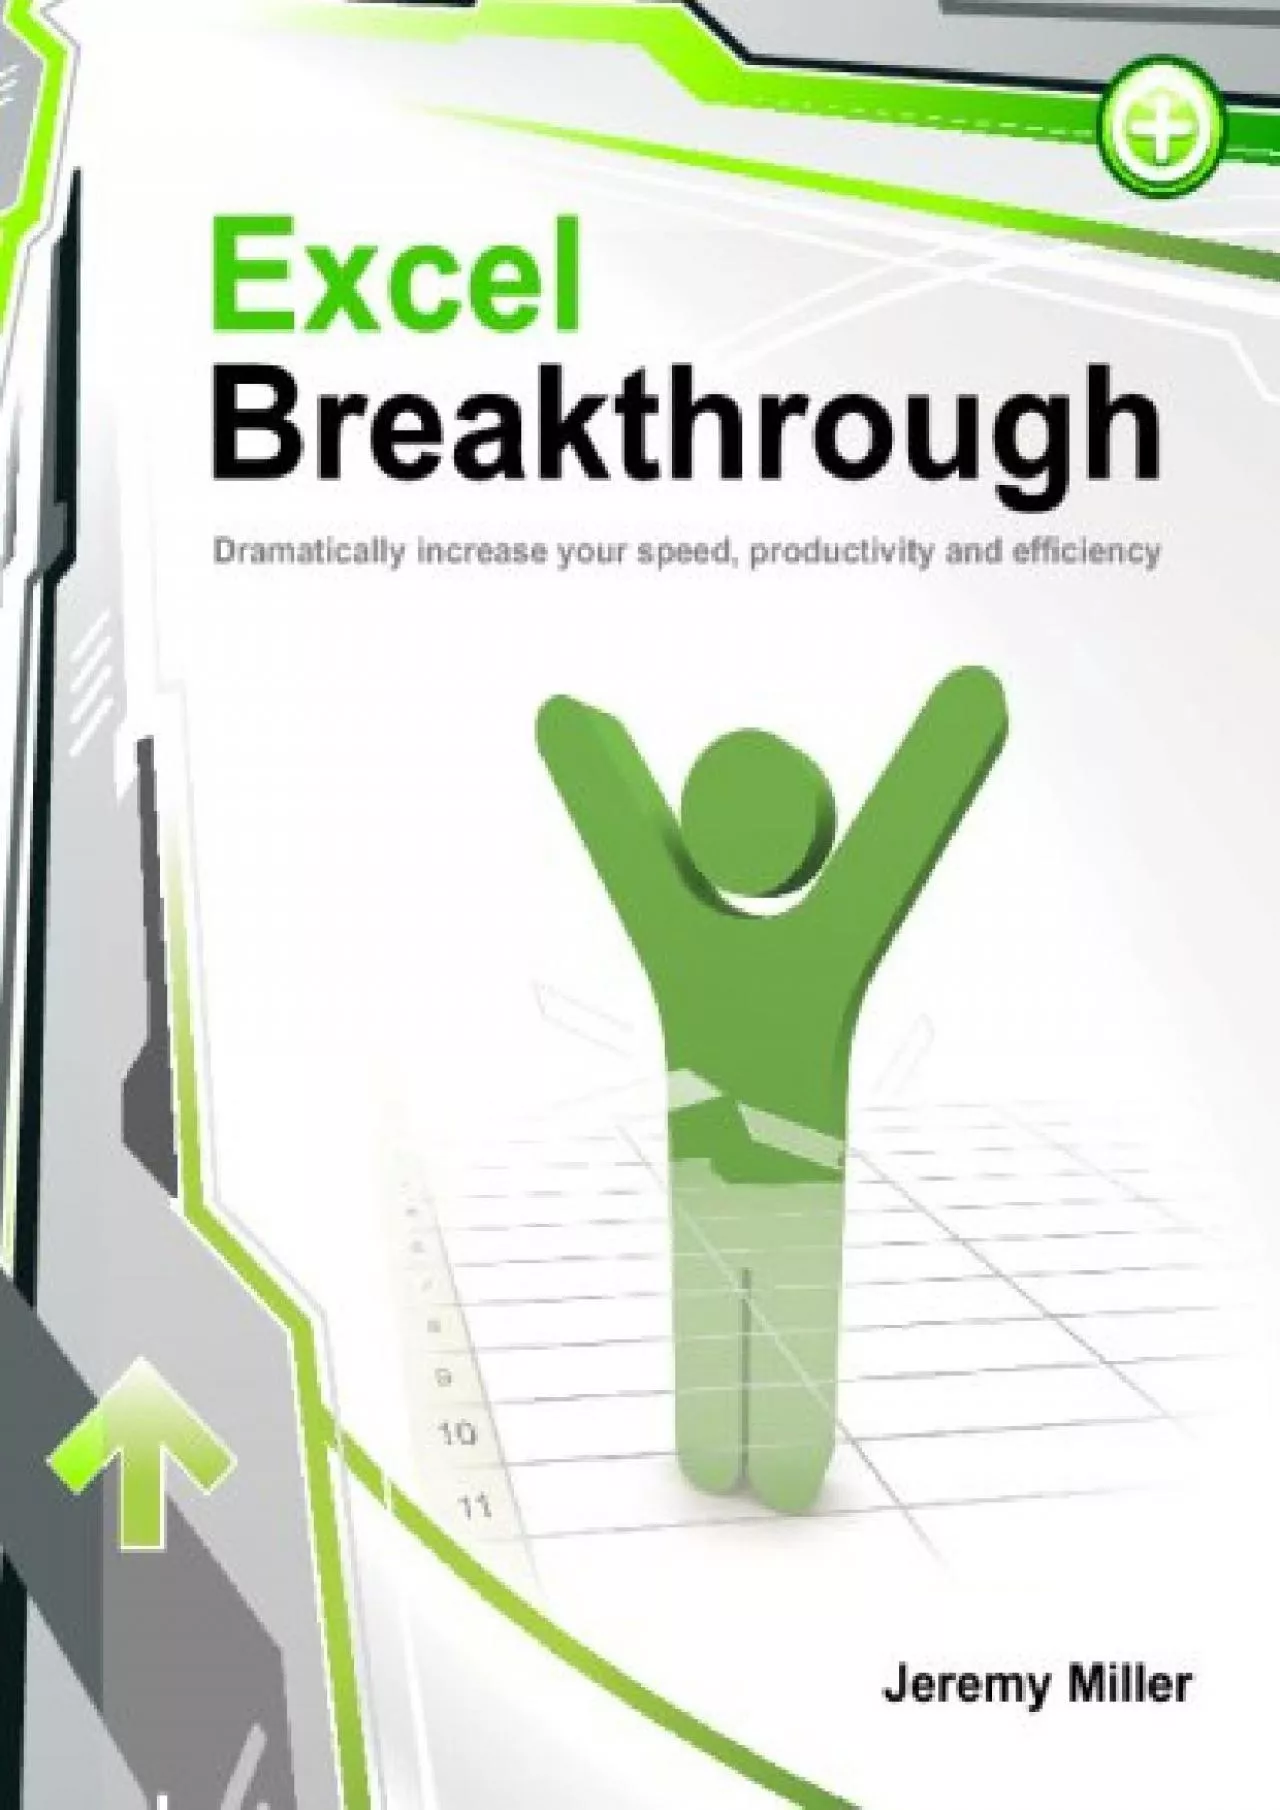 (DOWNLOAD)-Excel Breakthrough: Dramatically Increase Your Speed, Productivity And Efficiency